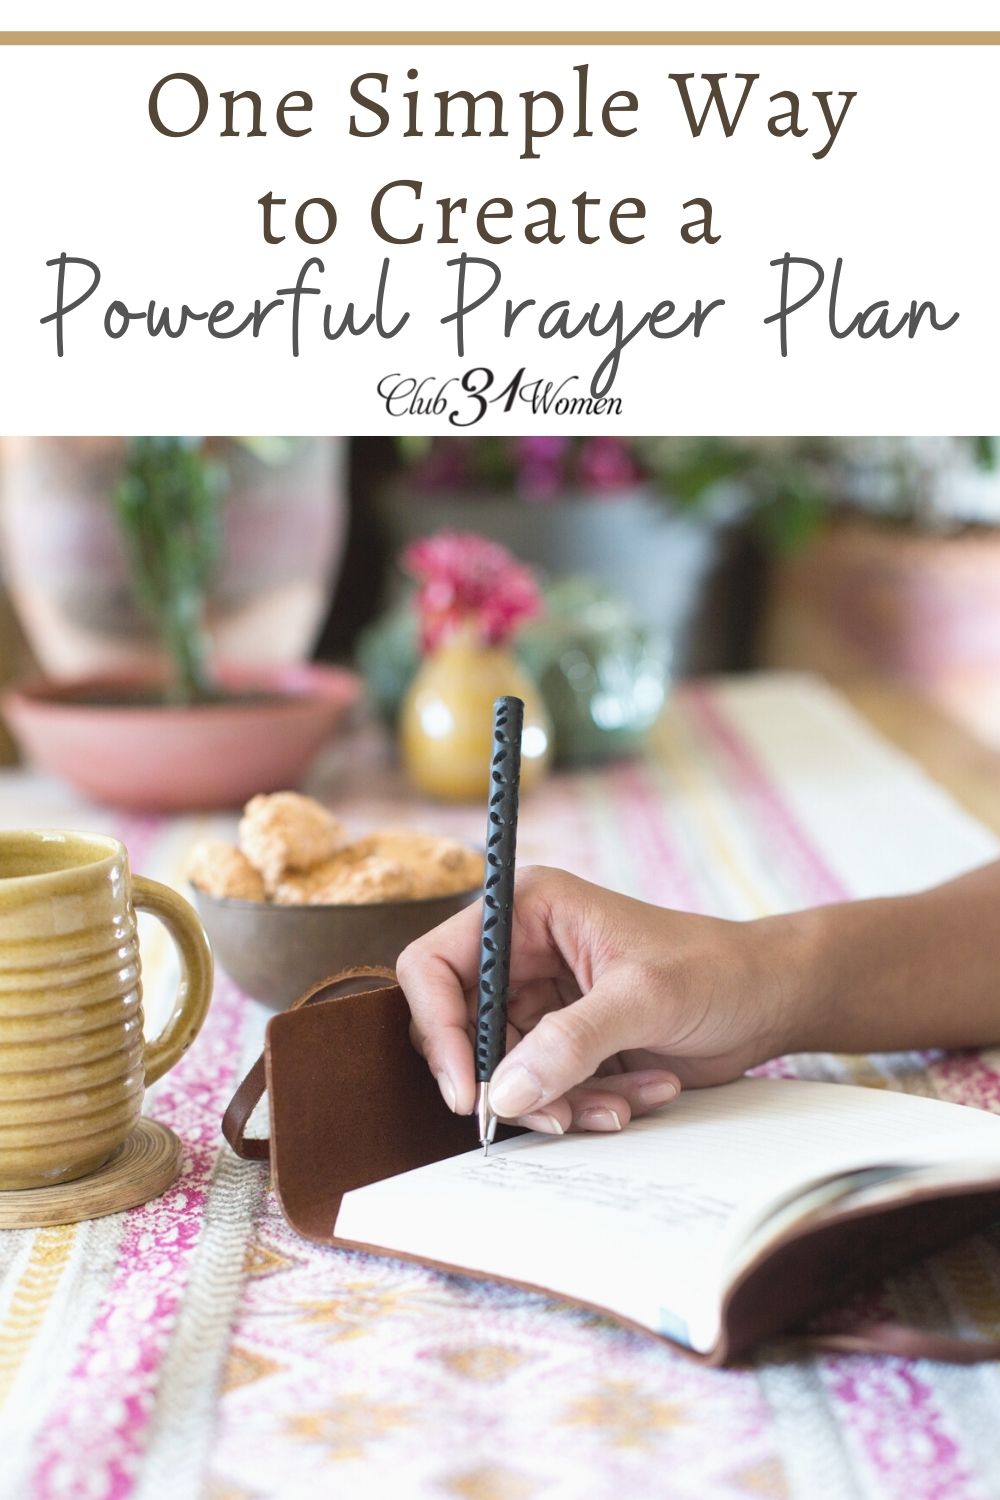 How in the world do you organize your prayer life? Do you have a plan? Here's an easy and effective approach to putting together a powerful prayer plan! via @Club31Women